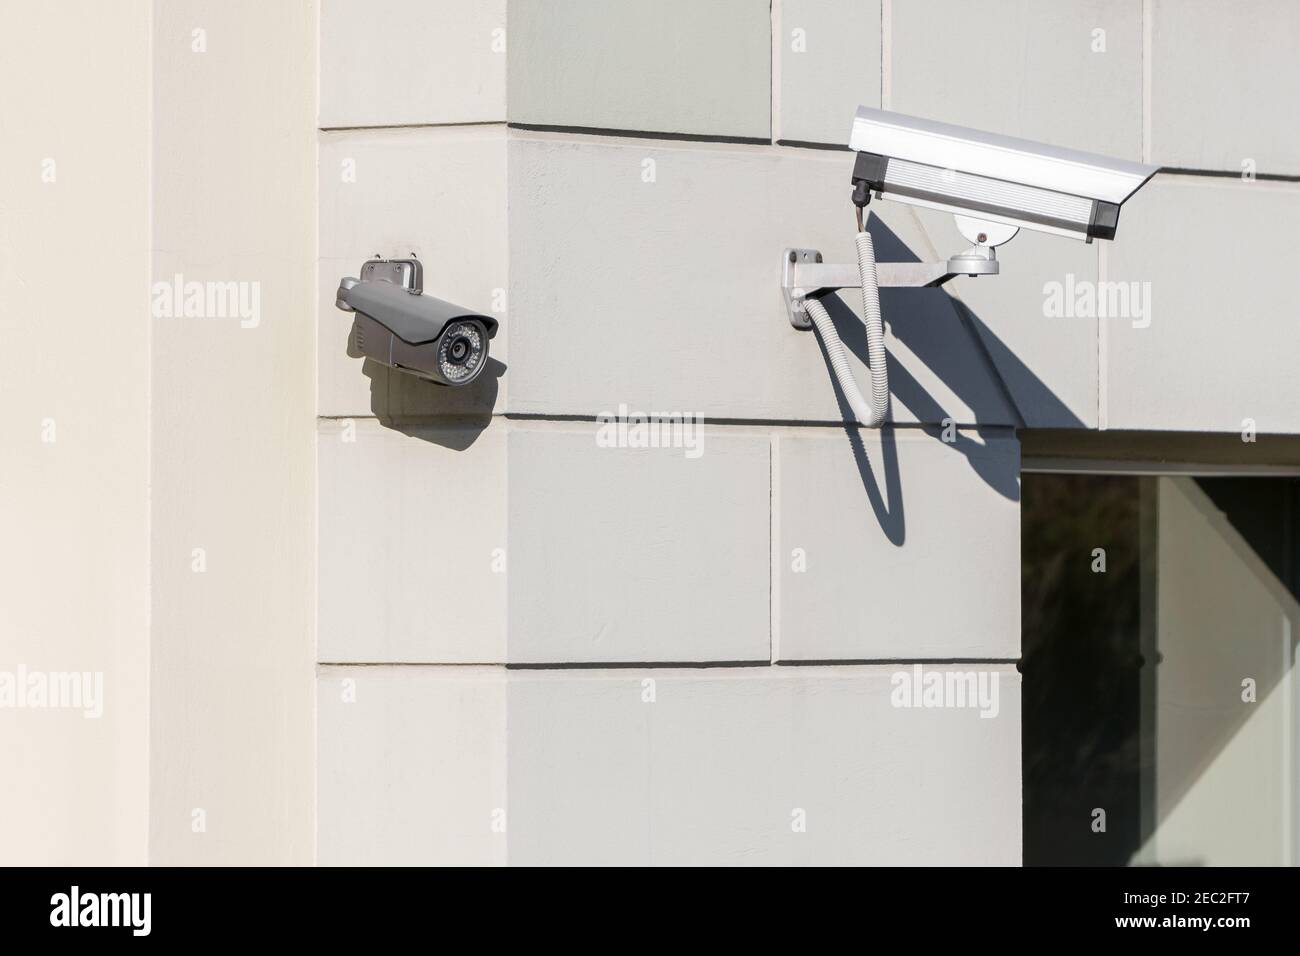 Modern CCTV cameras installed on building wall in city. Concept of surveillance and monitoring. Stock Photo